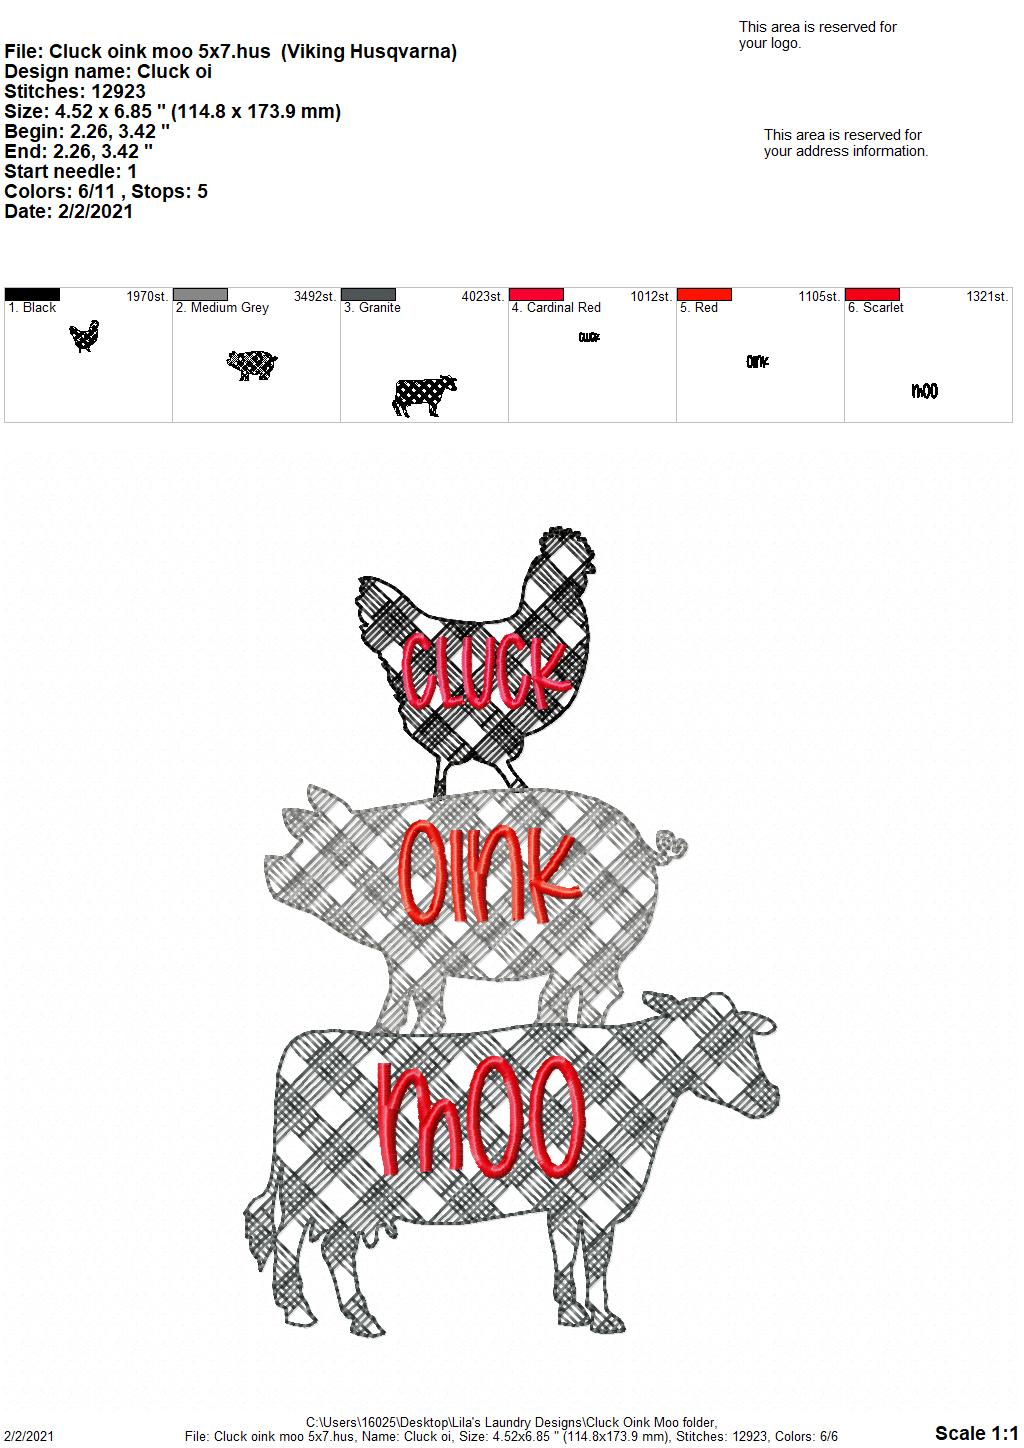 Cluck Oink Moo - 3 sizes- Digital Embroidery Design